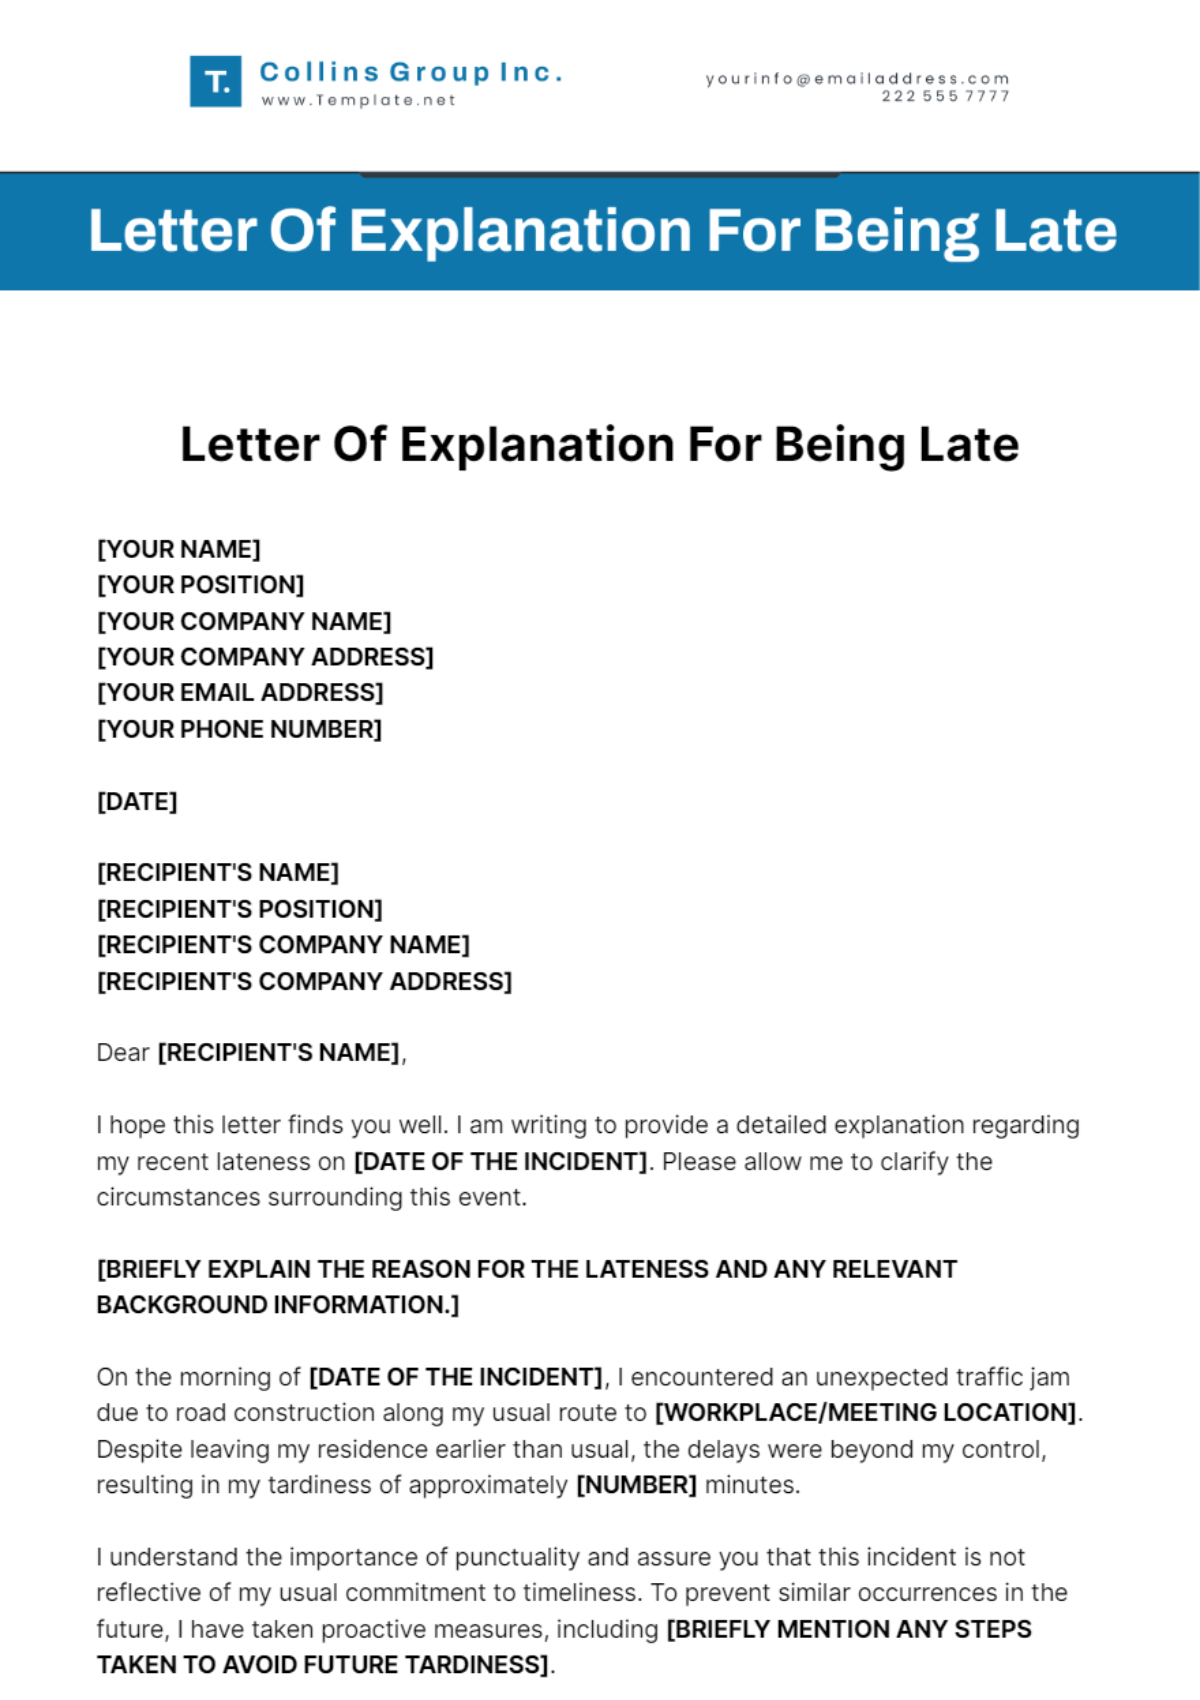 Letter Of Explanation For Being Late Template